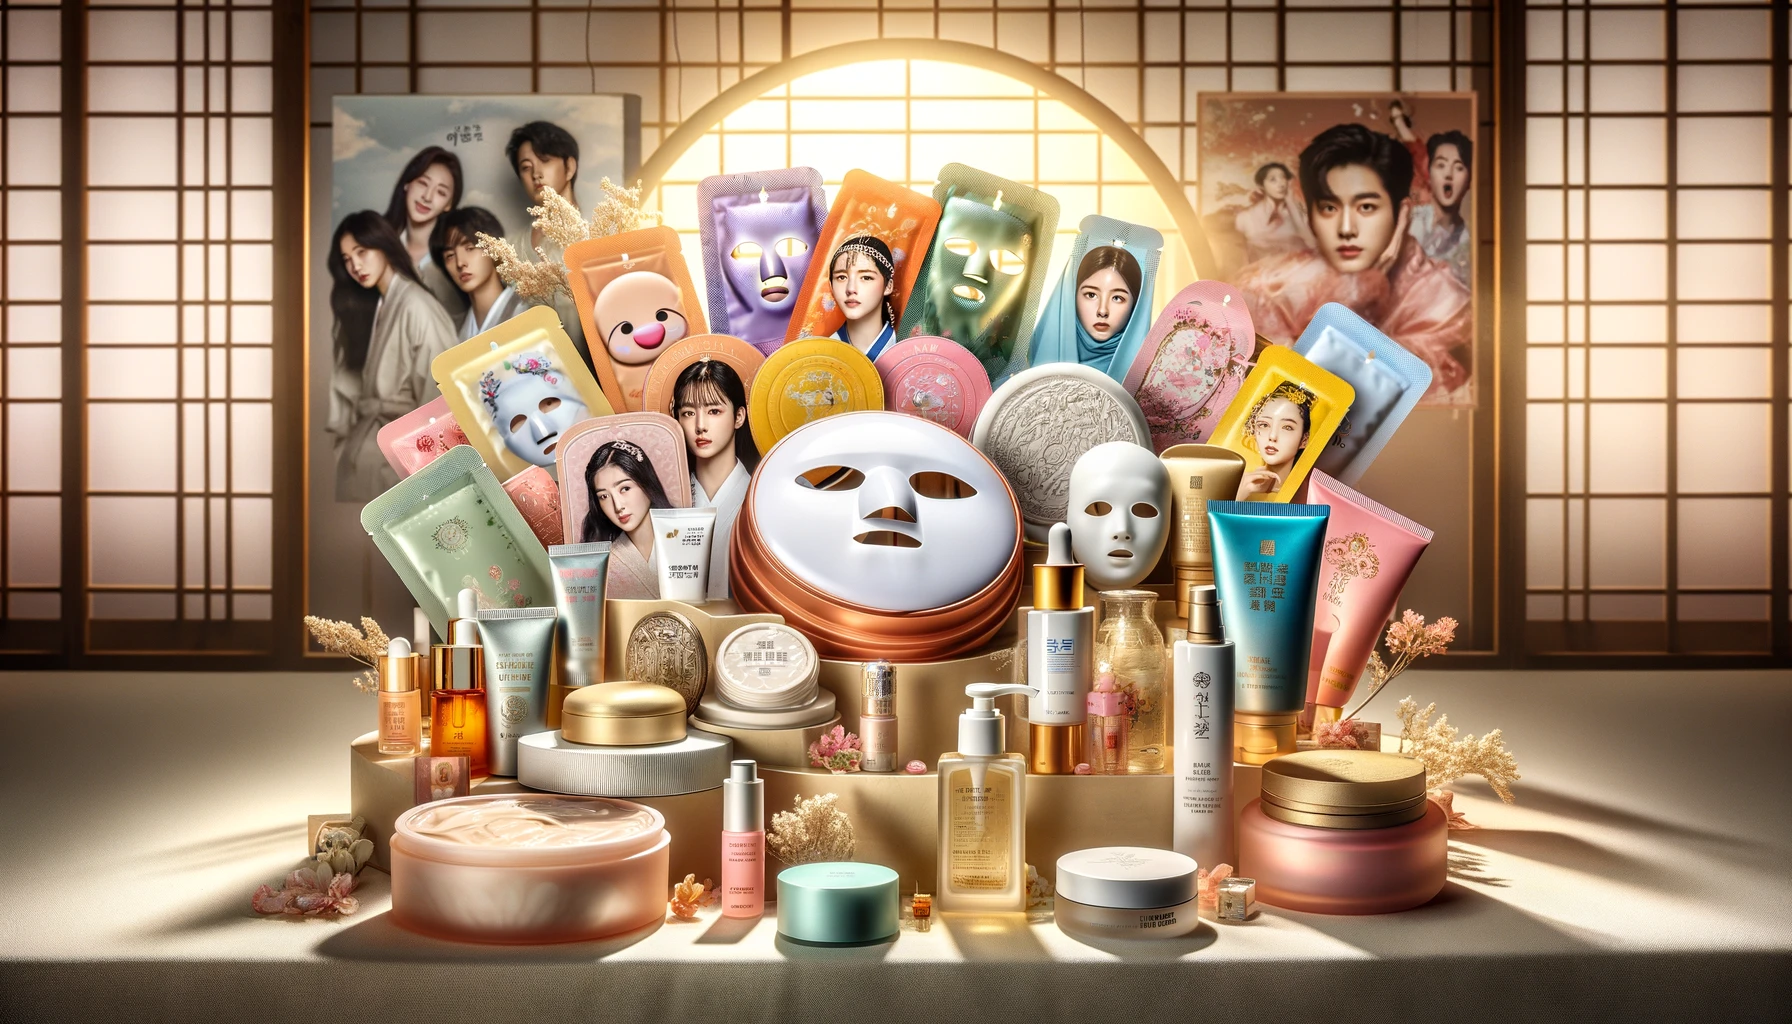 A vibrant display of Korean skincare products, including sheet masks, BB creams, essences, and cushion compacts, with subtle background imagery of South Korean celebrities and K-pop idols, highlighting the influence of the Hallyu Wave on global beauty trends.